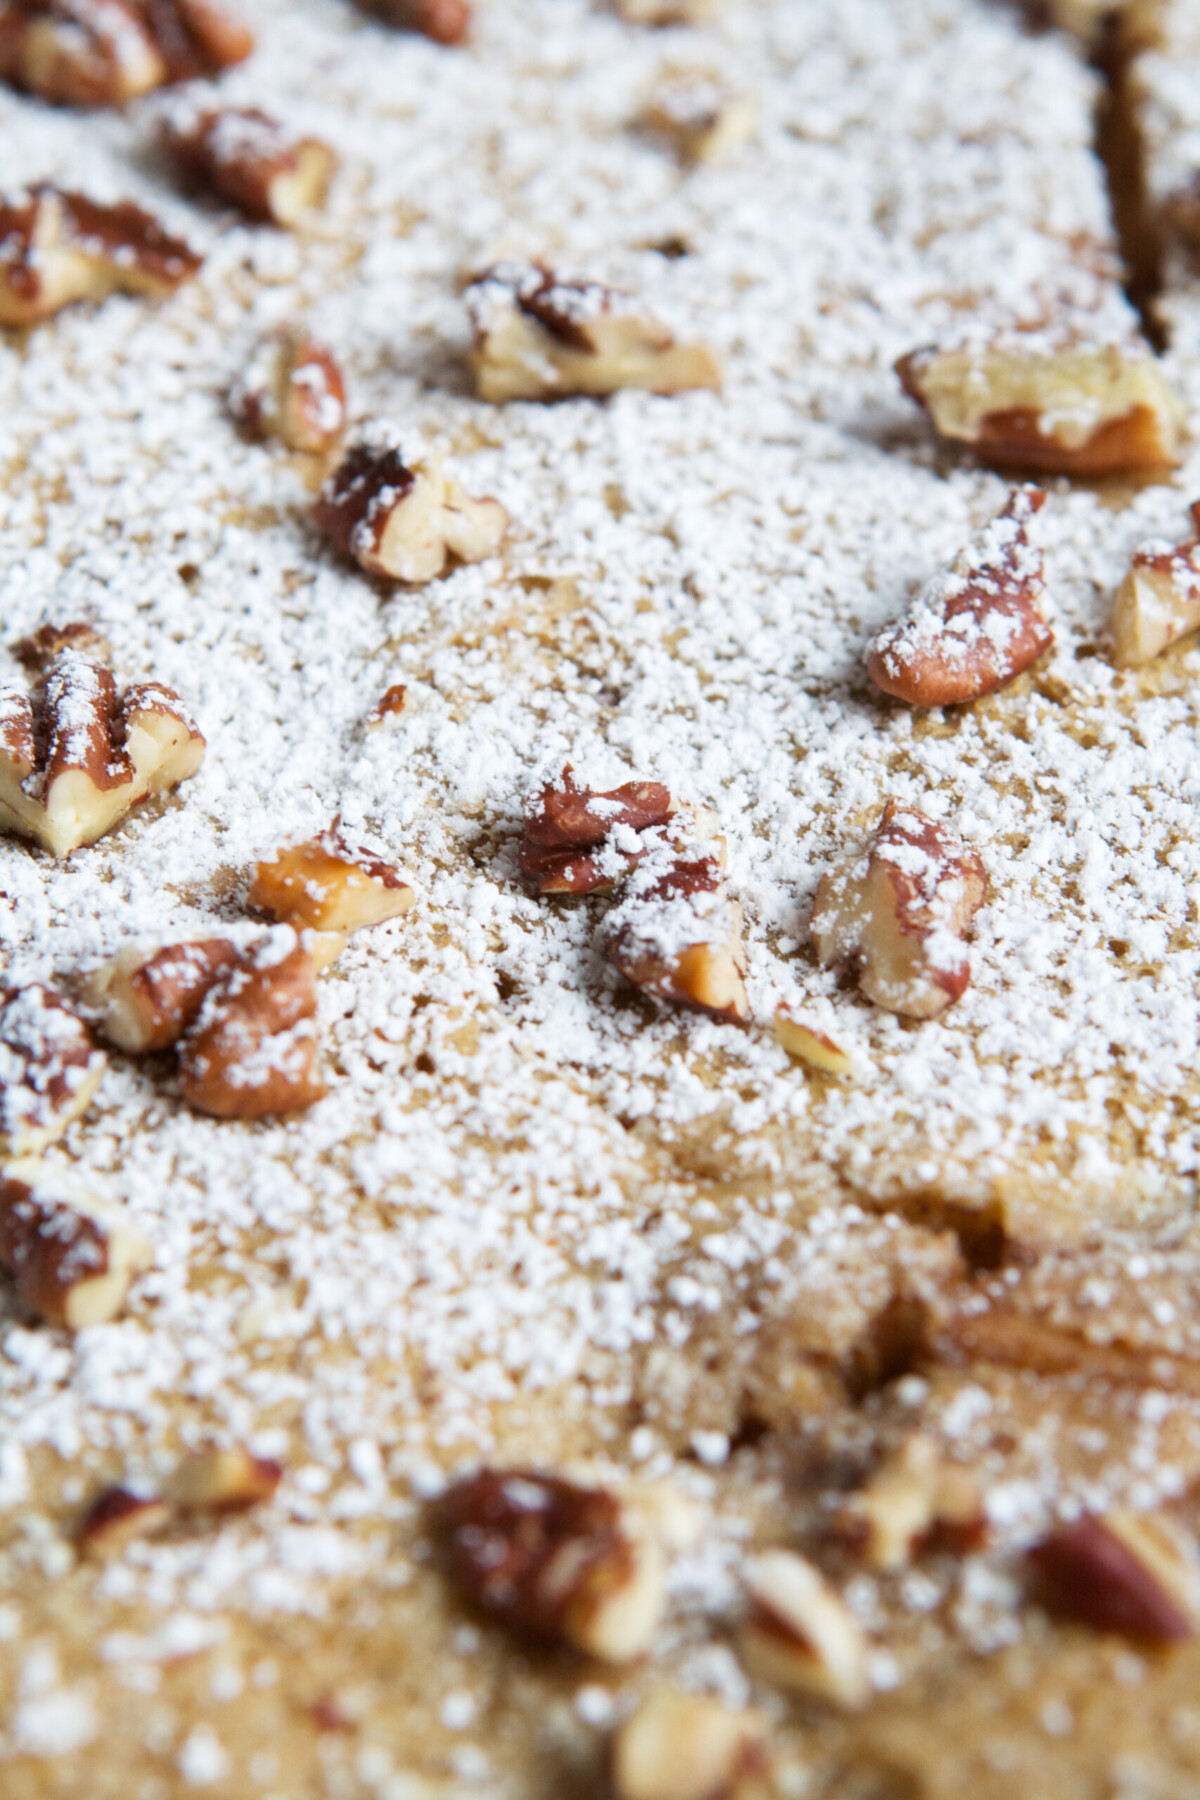 Close up photo of powdered sugar and nuts scattered on a puffed apple pancake